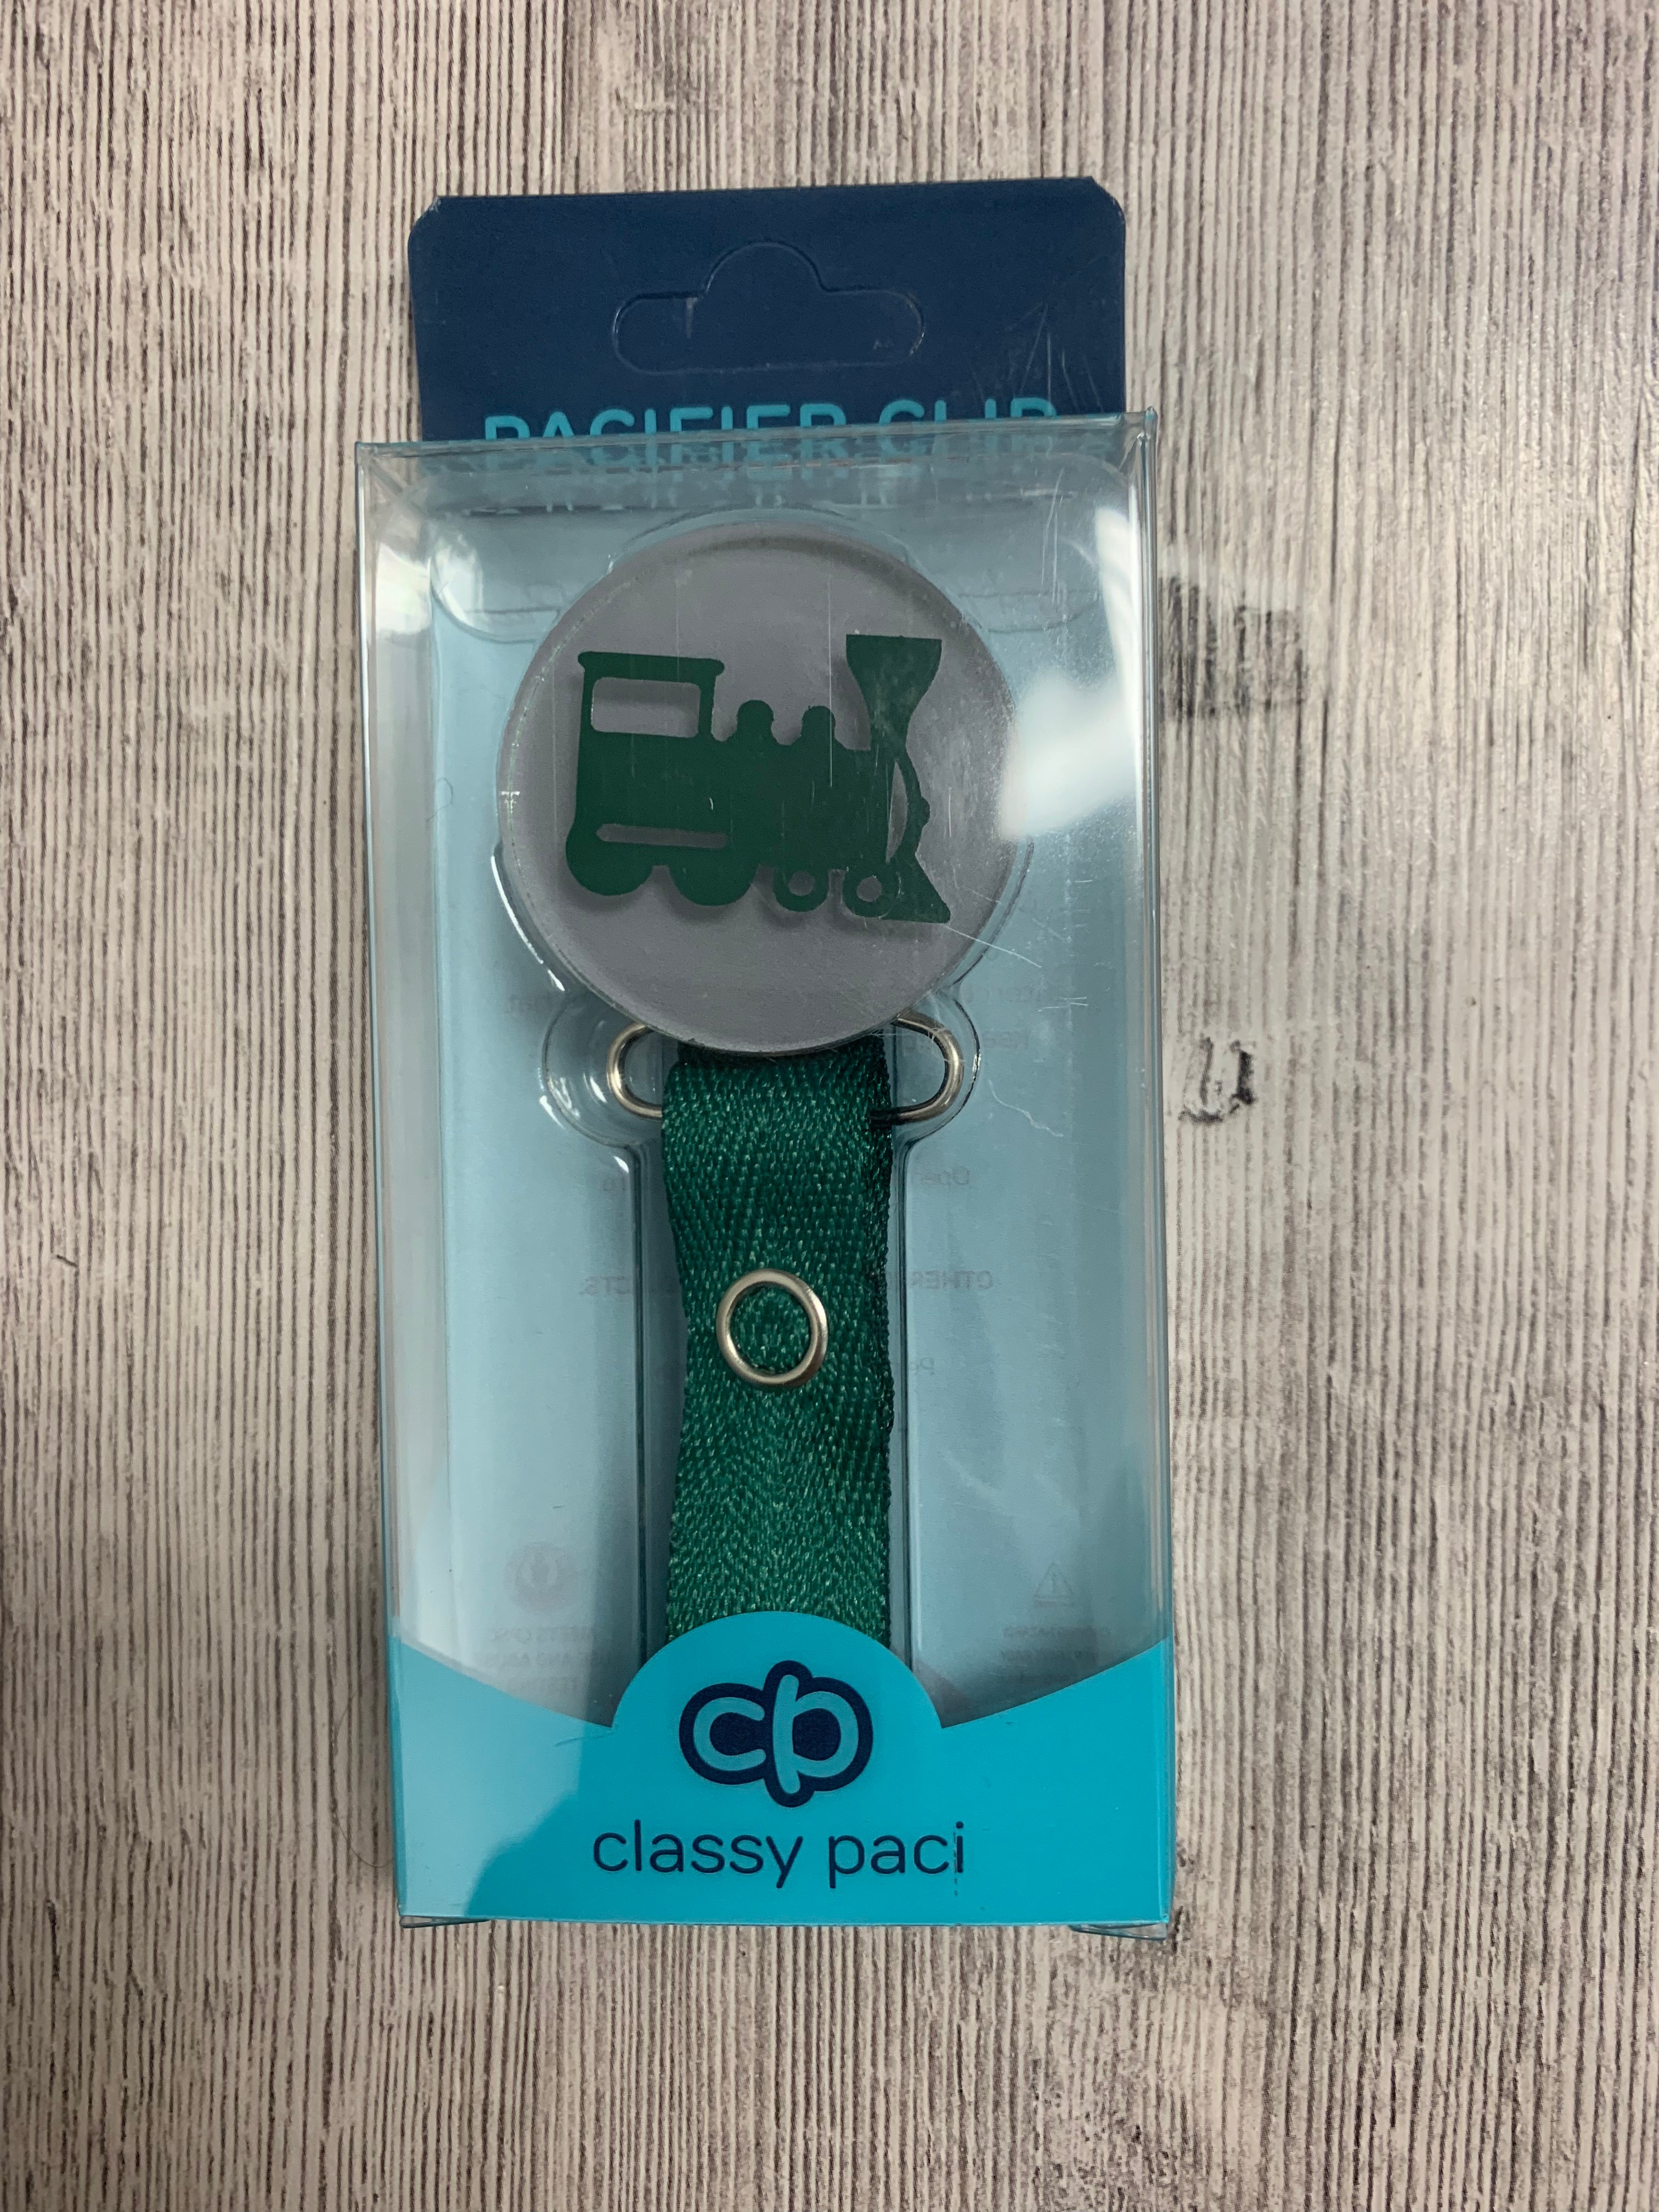 Classy Paci Vivid Green Train  clip with Bibs pacifier GIFT SET